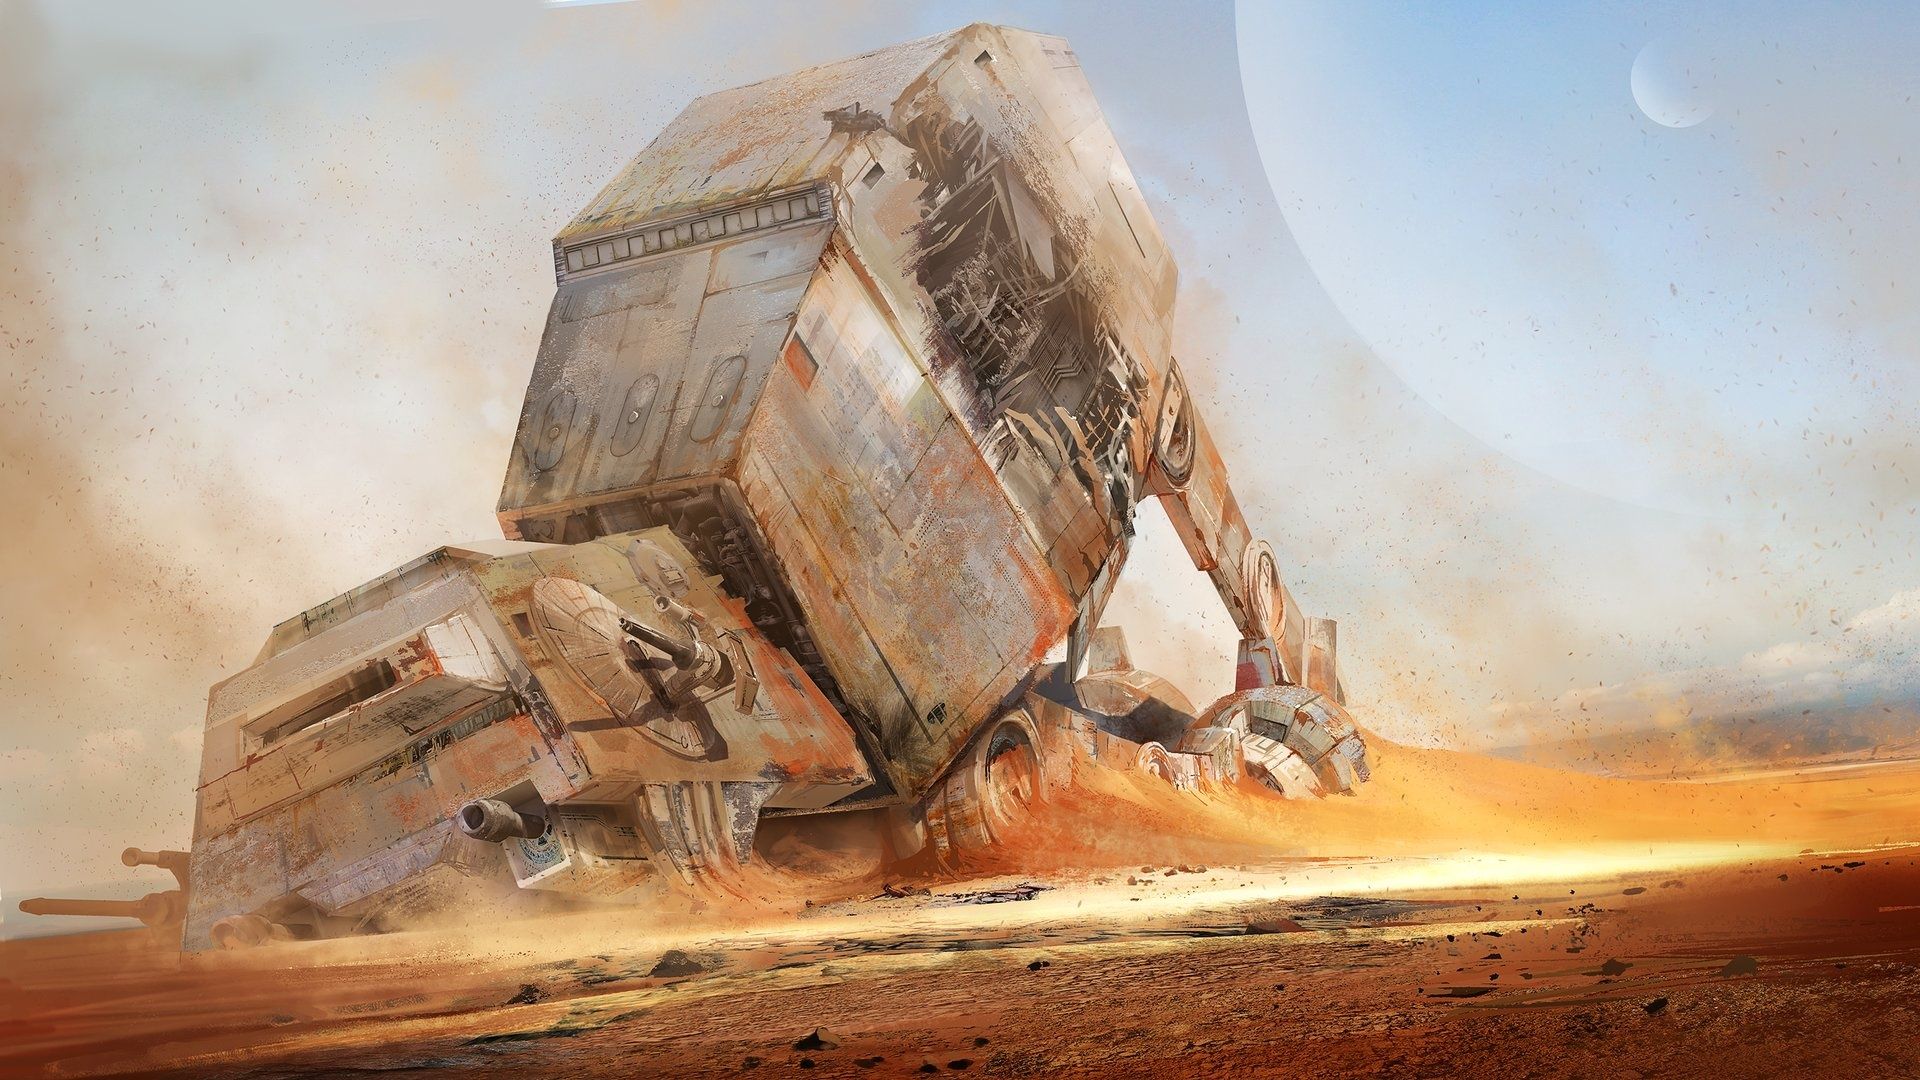 A desert planet with a giant AT-AT walking vehicle from Star Wars being destroyed - Star Wars